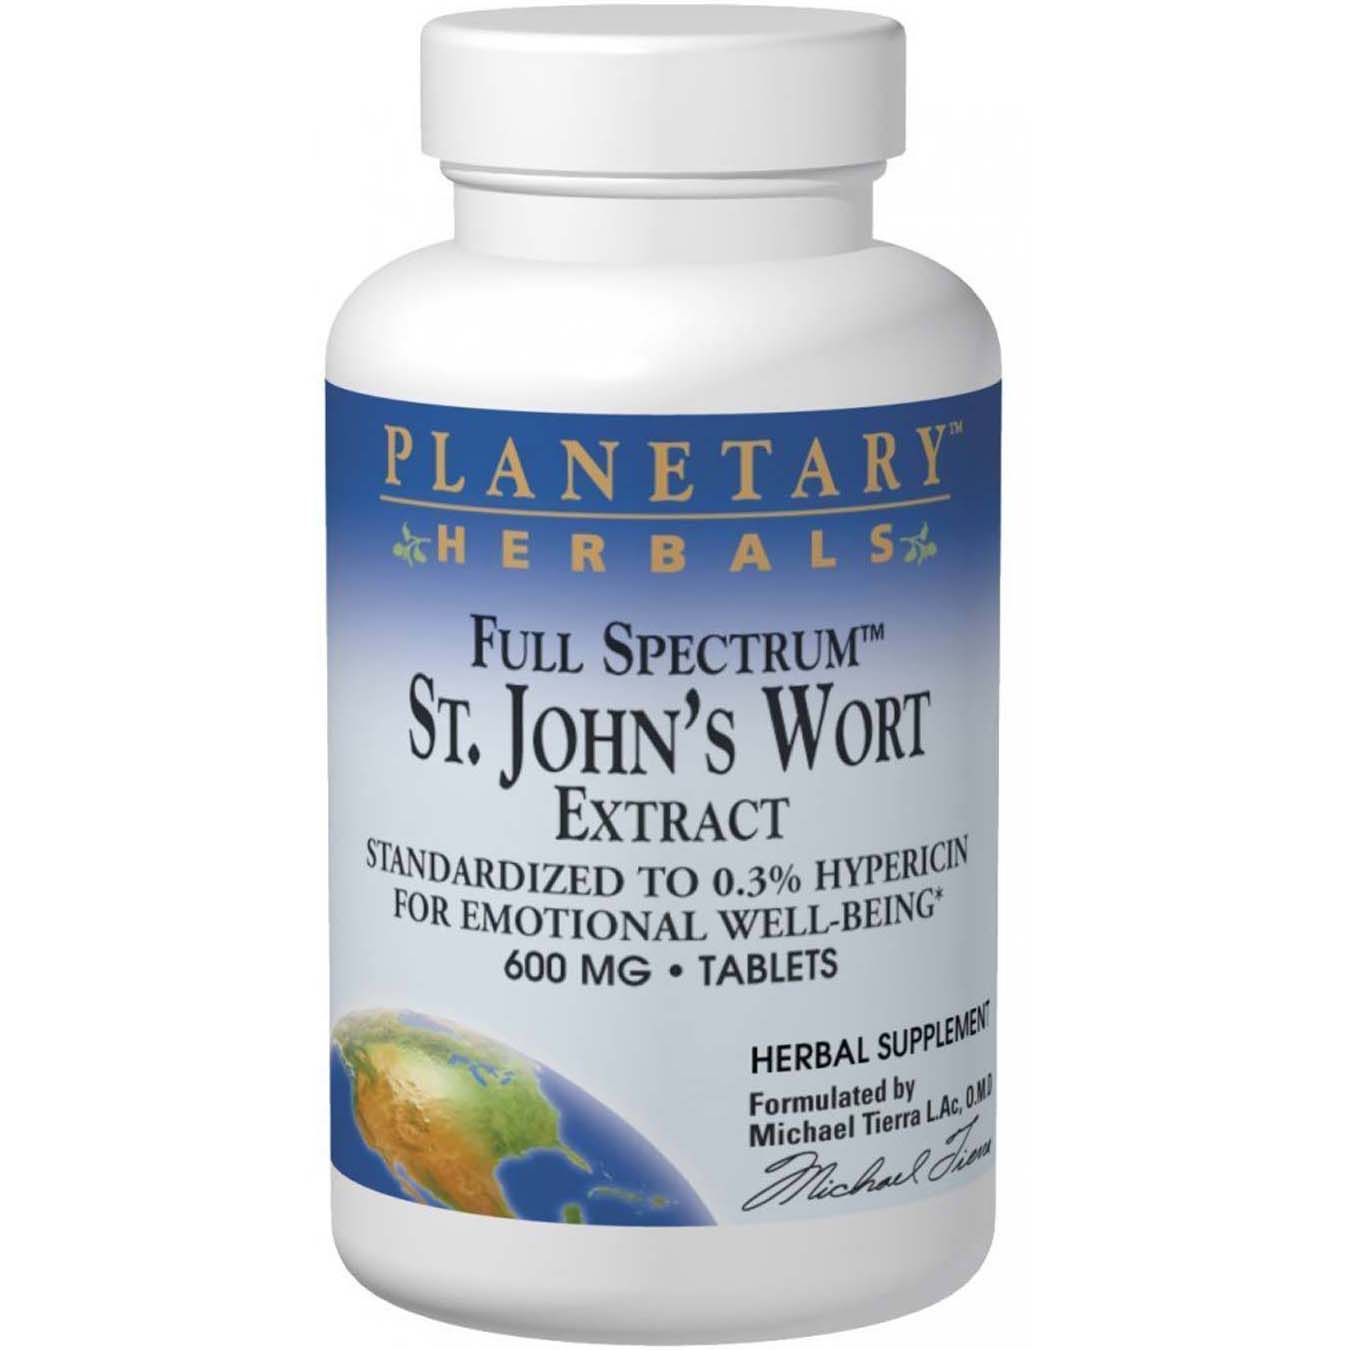 Planetary Herbals St' John's Wort Extract Full Spectrum 30 Tablets 600 mg